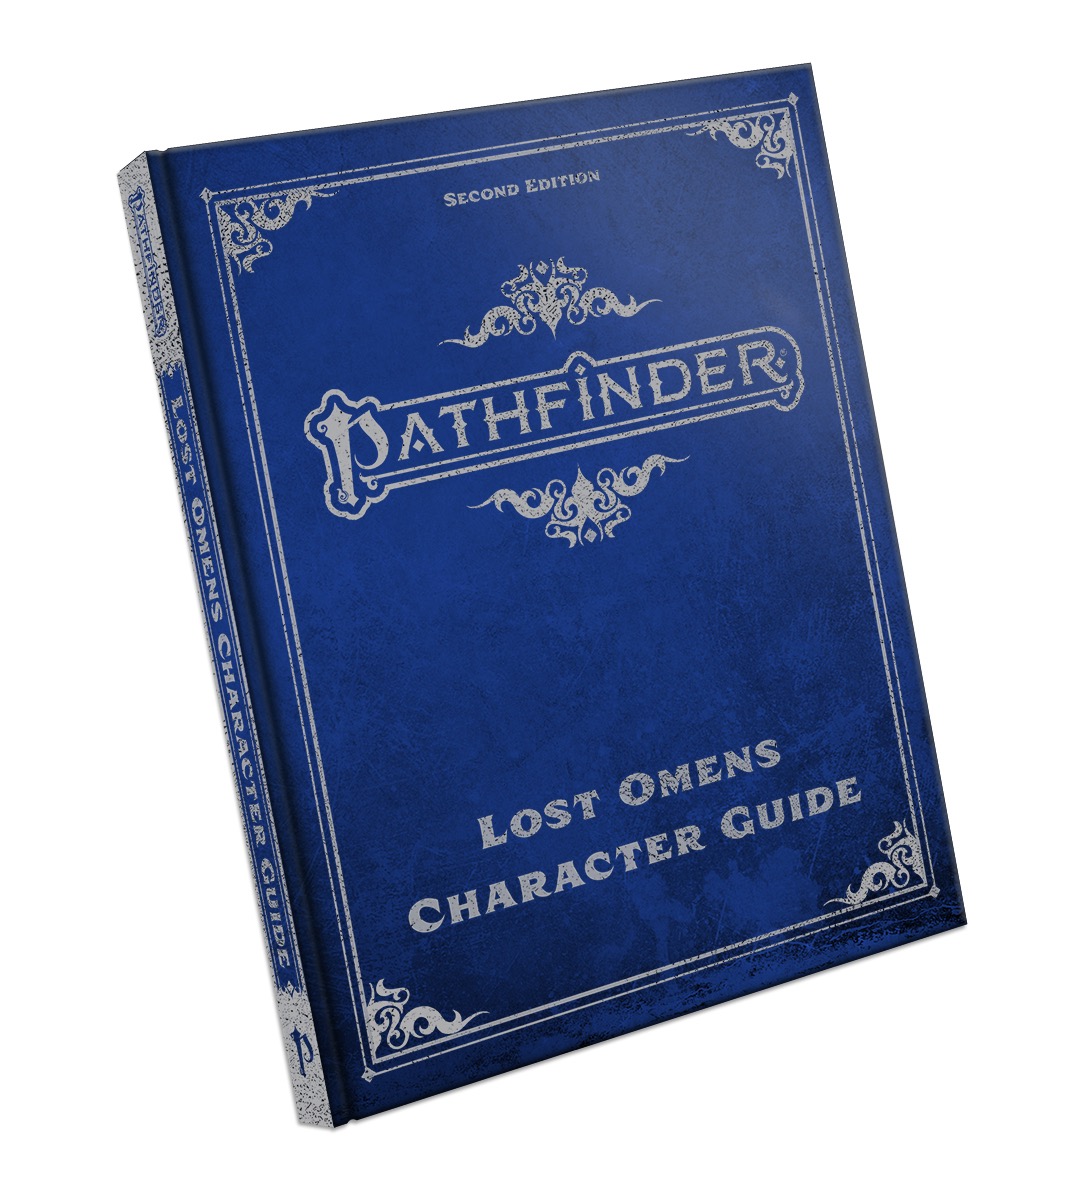 Humble Bundle - Pathfinder 2e, Physical book for $30 USD +